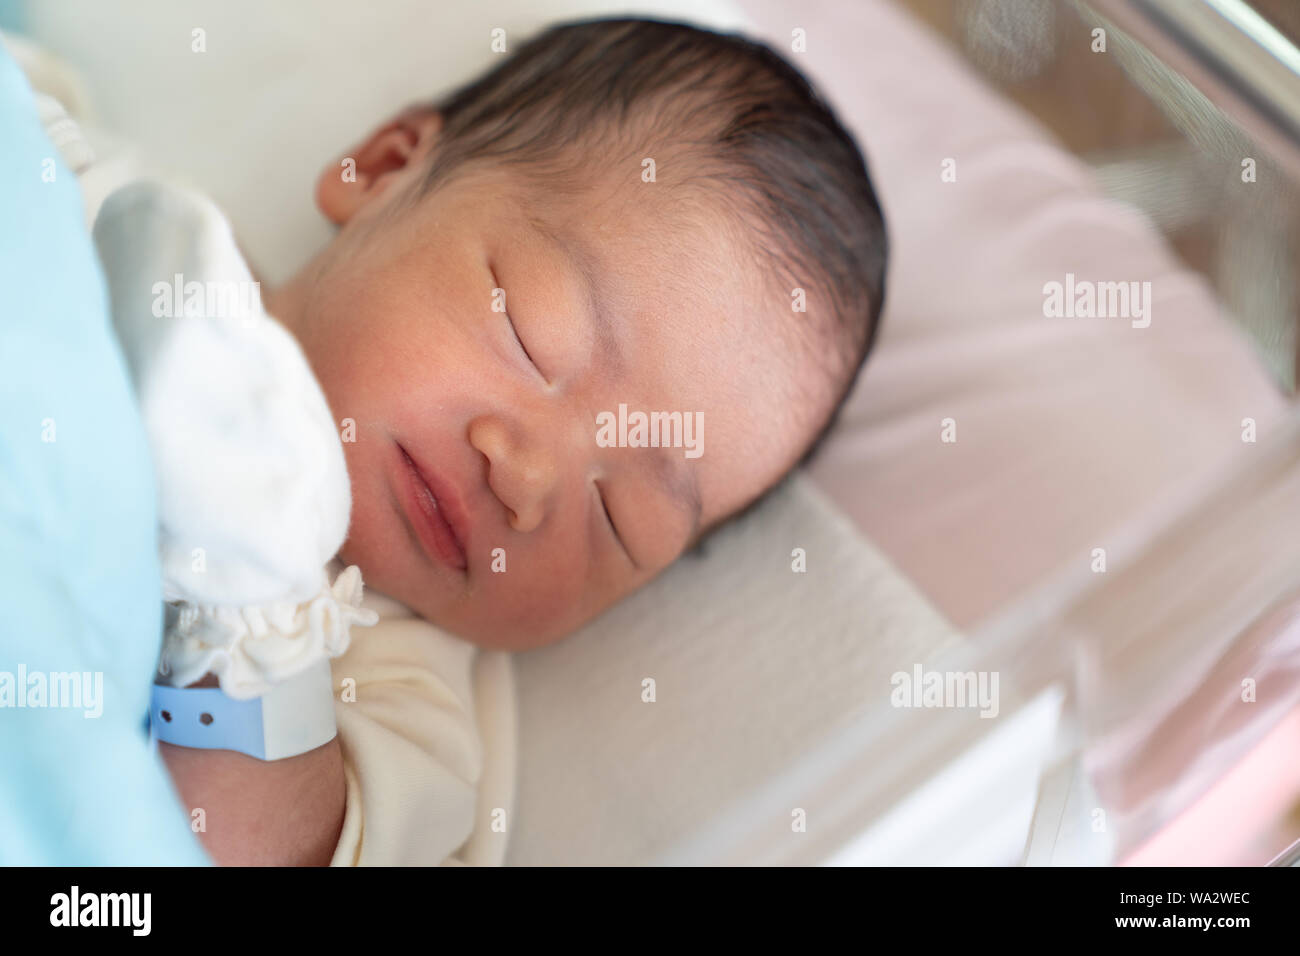 Asian big newborn baby at hospital first day of life, inside hospital crib after birth. Close up new born baby. Stock Photo